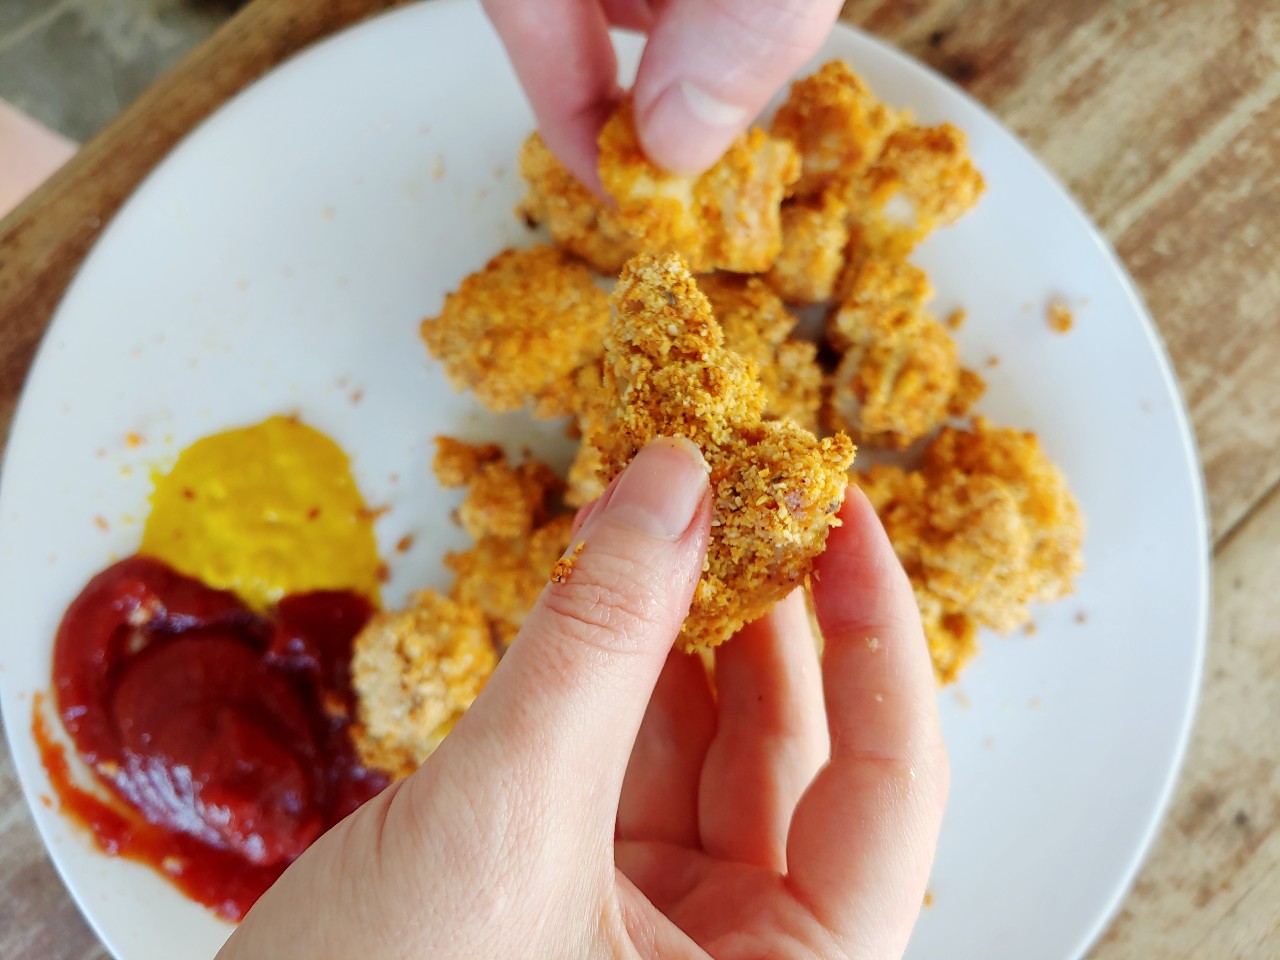 https://blissfulleating.com/whole30-air-fryer-chicken-nuggets/air-fryer-chicken-nuggets/